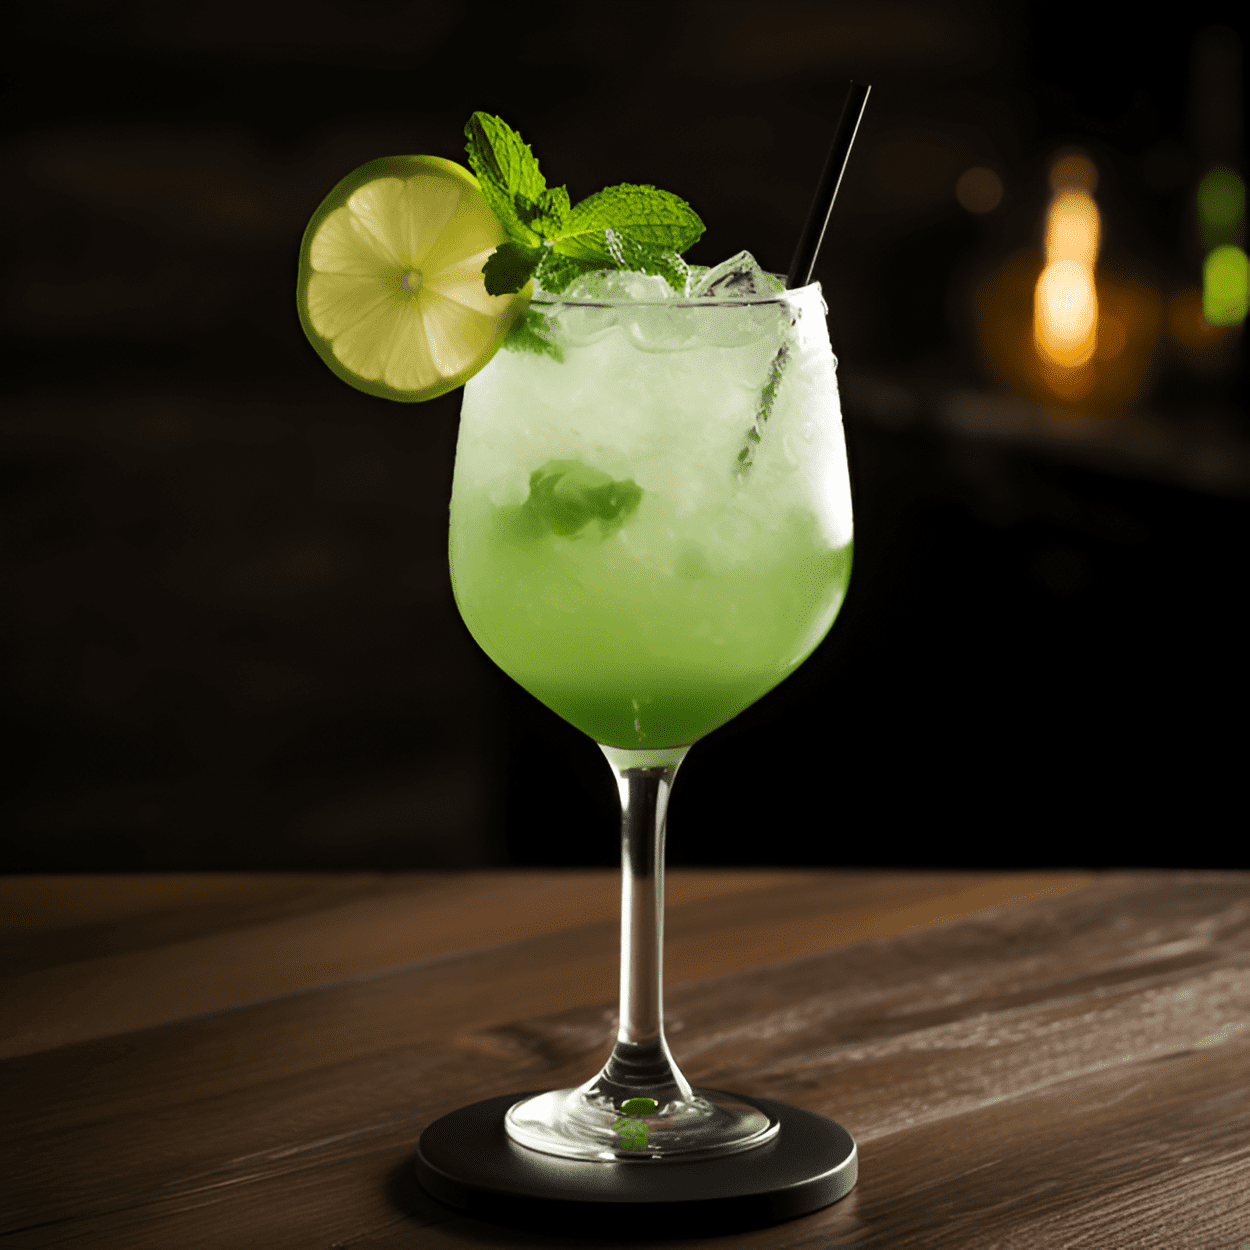 Lawnmower Cocktail Recipe - The Lawnmower is a delightfully fresh cocktail with a strong herbal flavor. It has a light sweetness that is balanced by the tartness of the lime. The gin adds a nice complexity to the drink, making it a refreshing and invigorating cocktail.